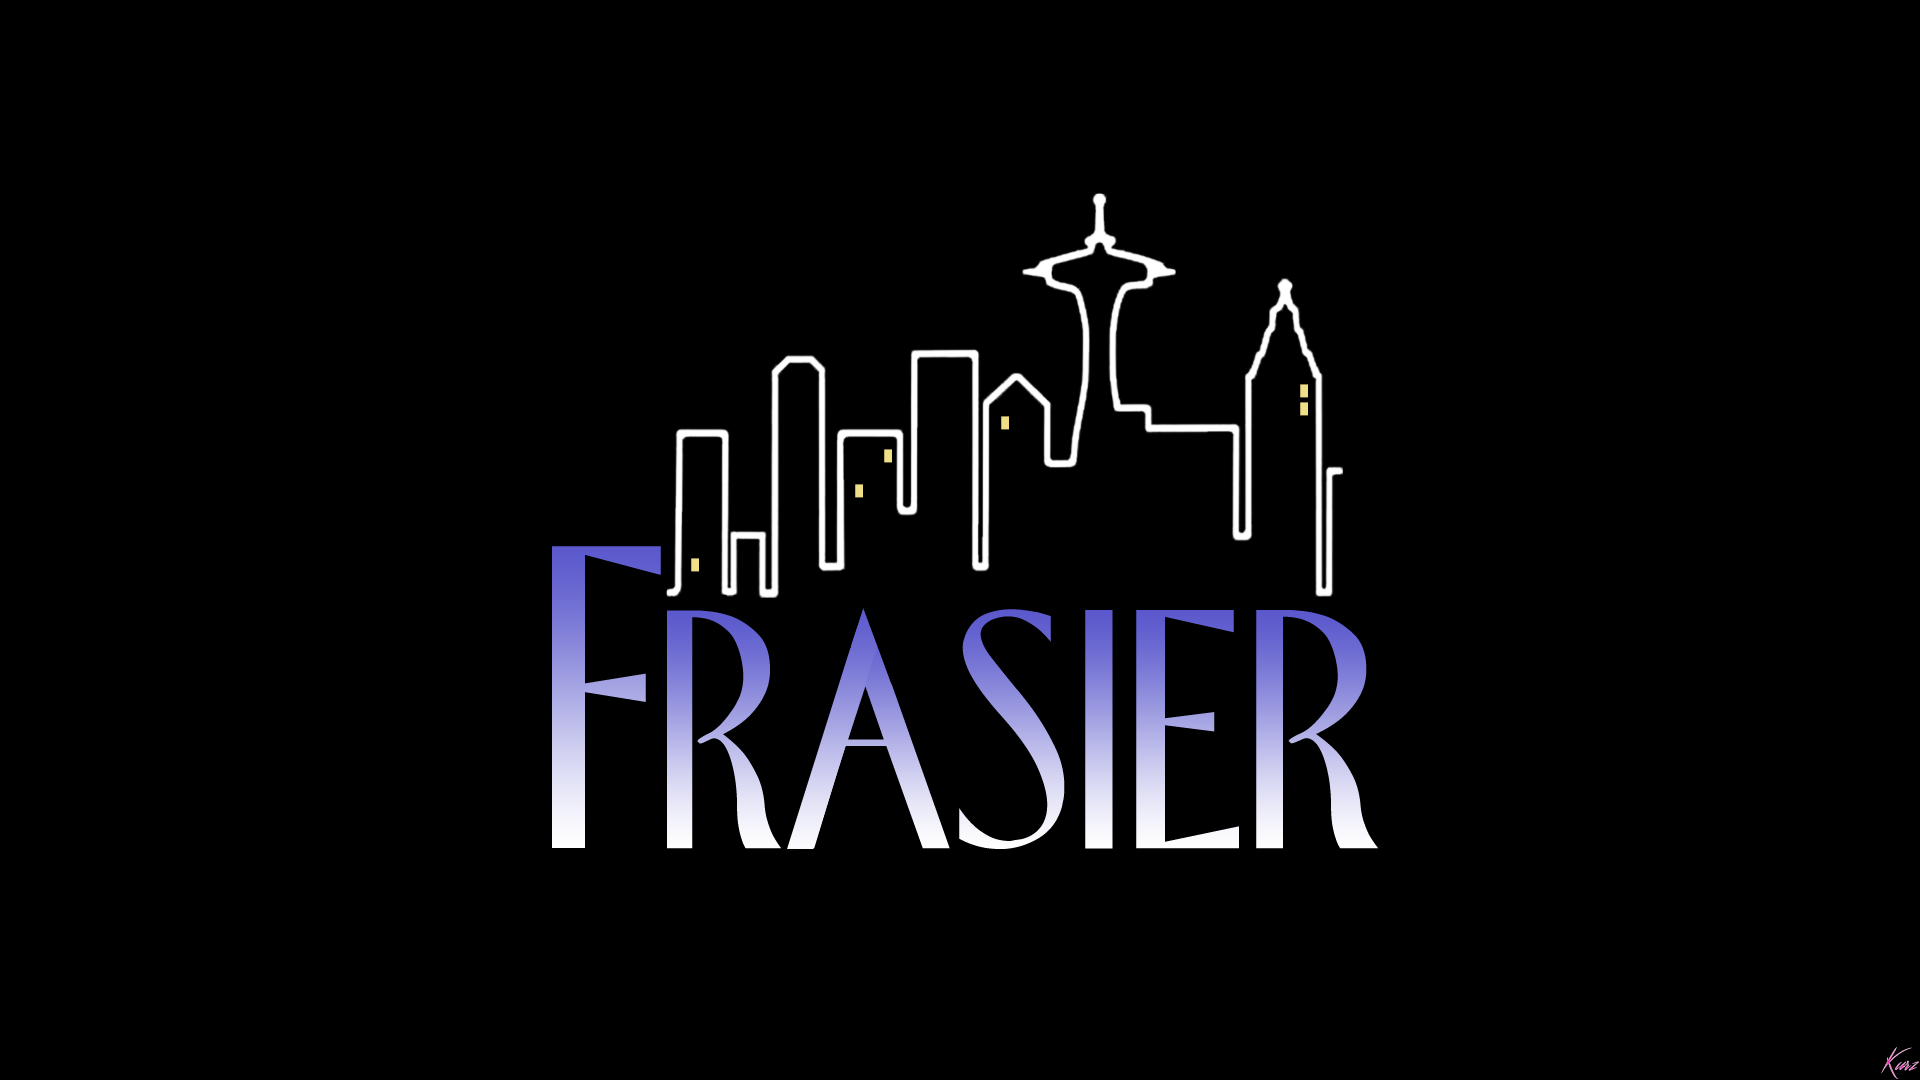 General 1920x1080 Frasier title Seattle logo Space Needle simple background black background